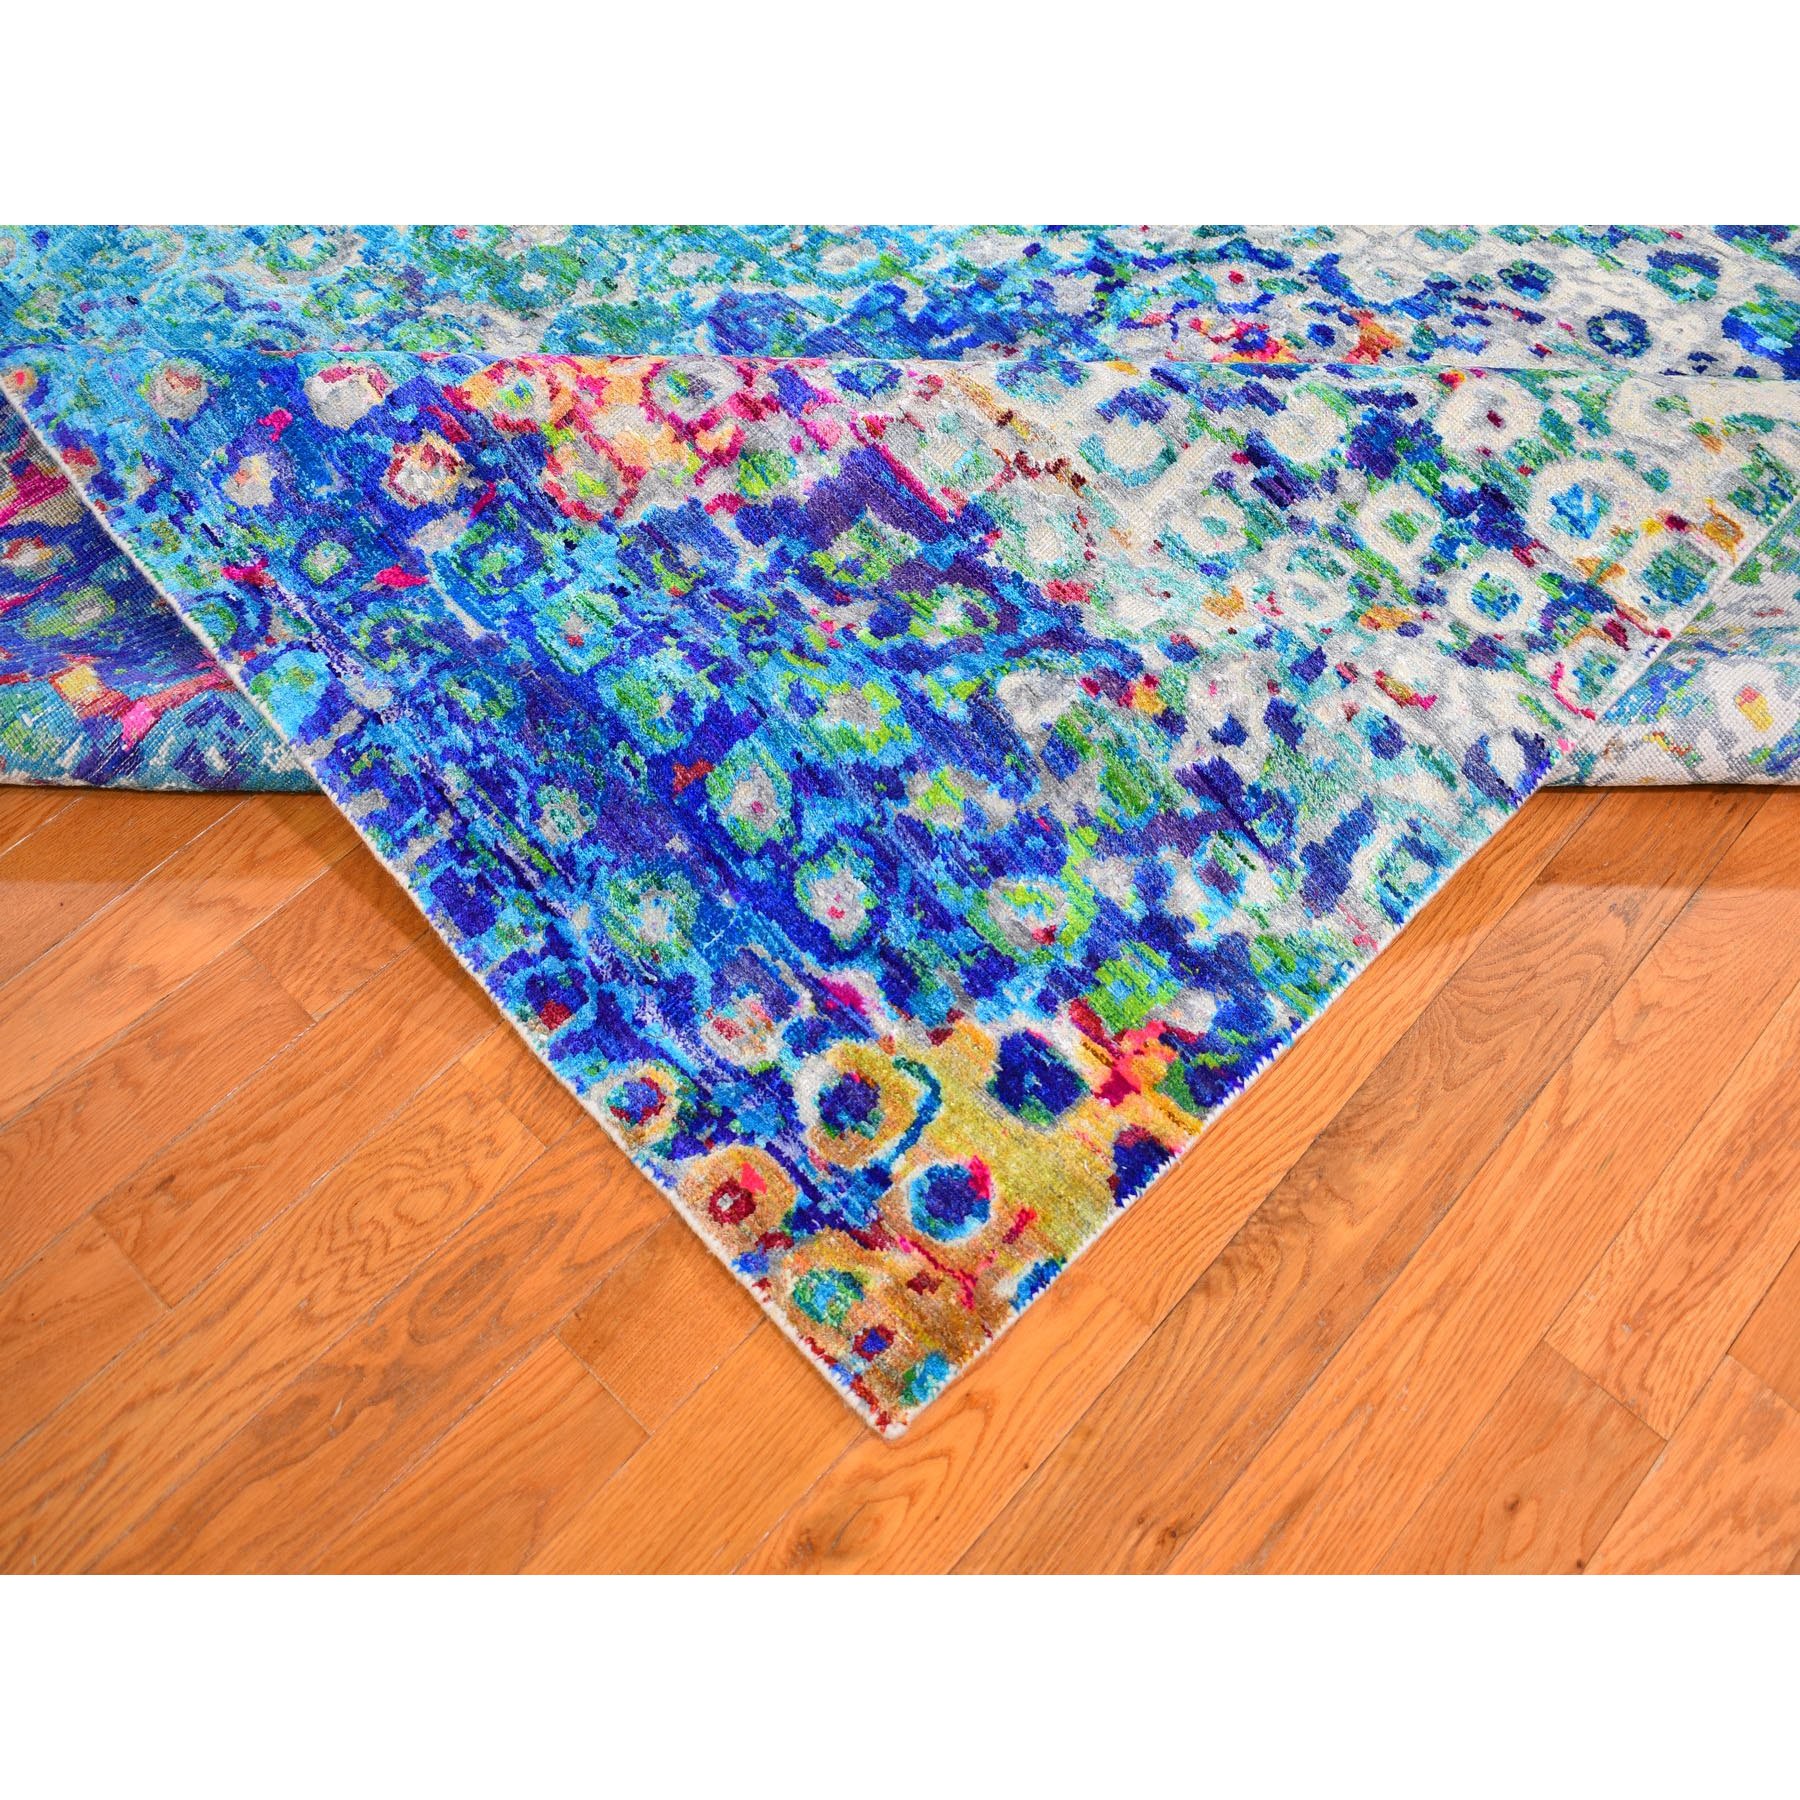 8-x10-3  THE PEACOCK, Sari Silk Colorful Hand Knotted Oriental Rug 